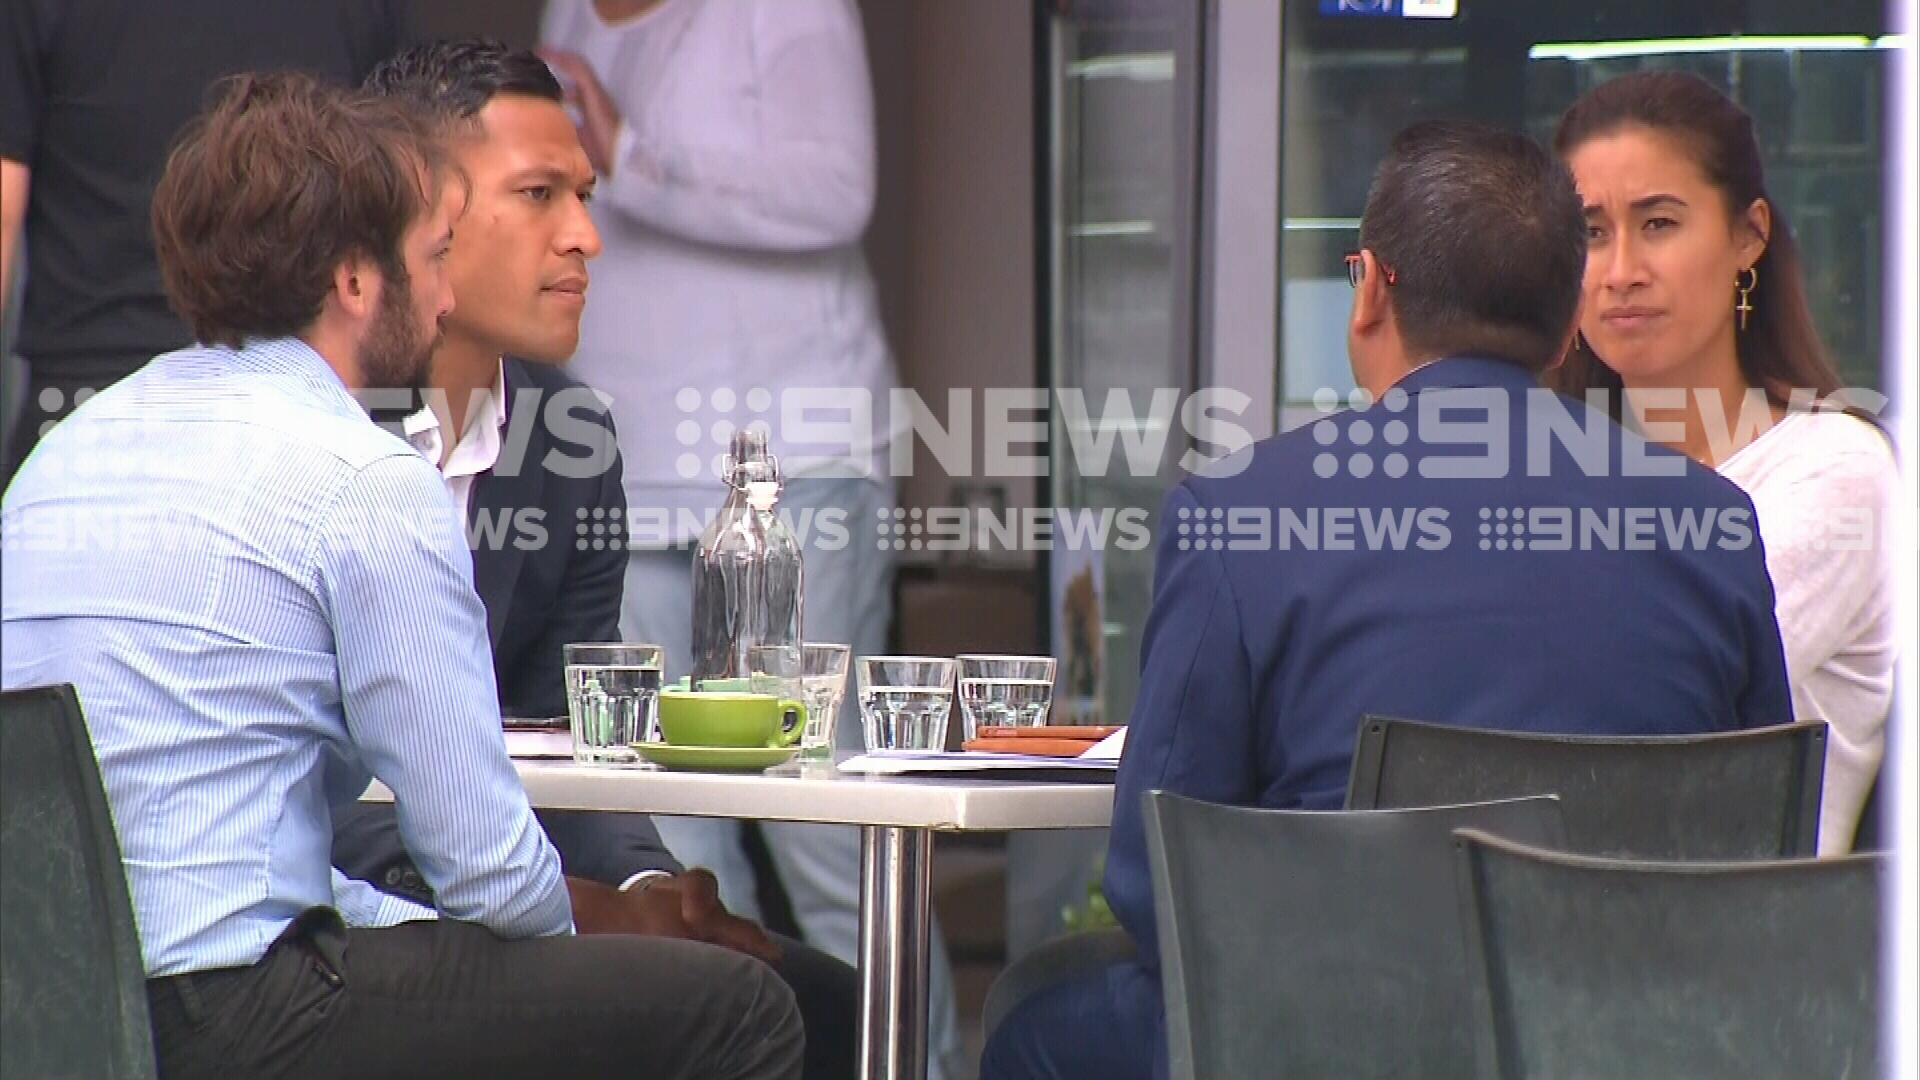 Exclusive: Israel Folau filmed in Sydney cafe after being sacked by Rugby Australia